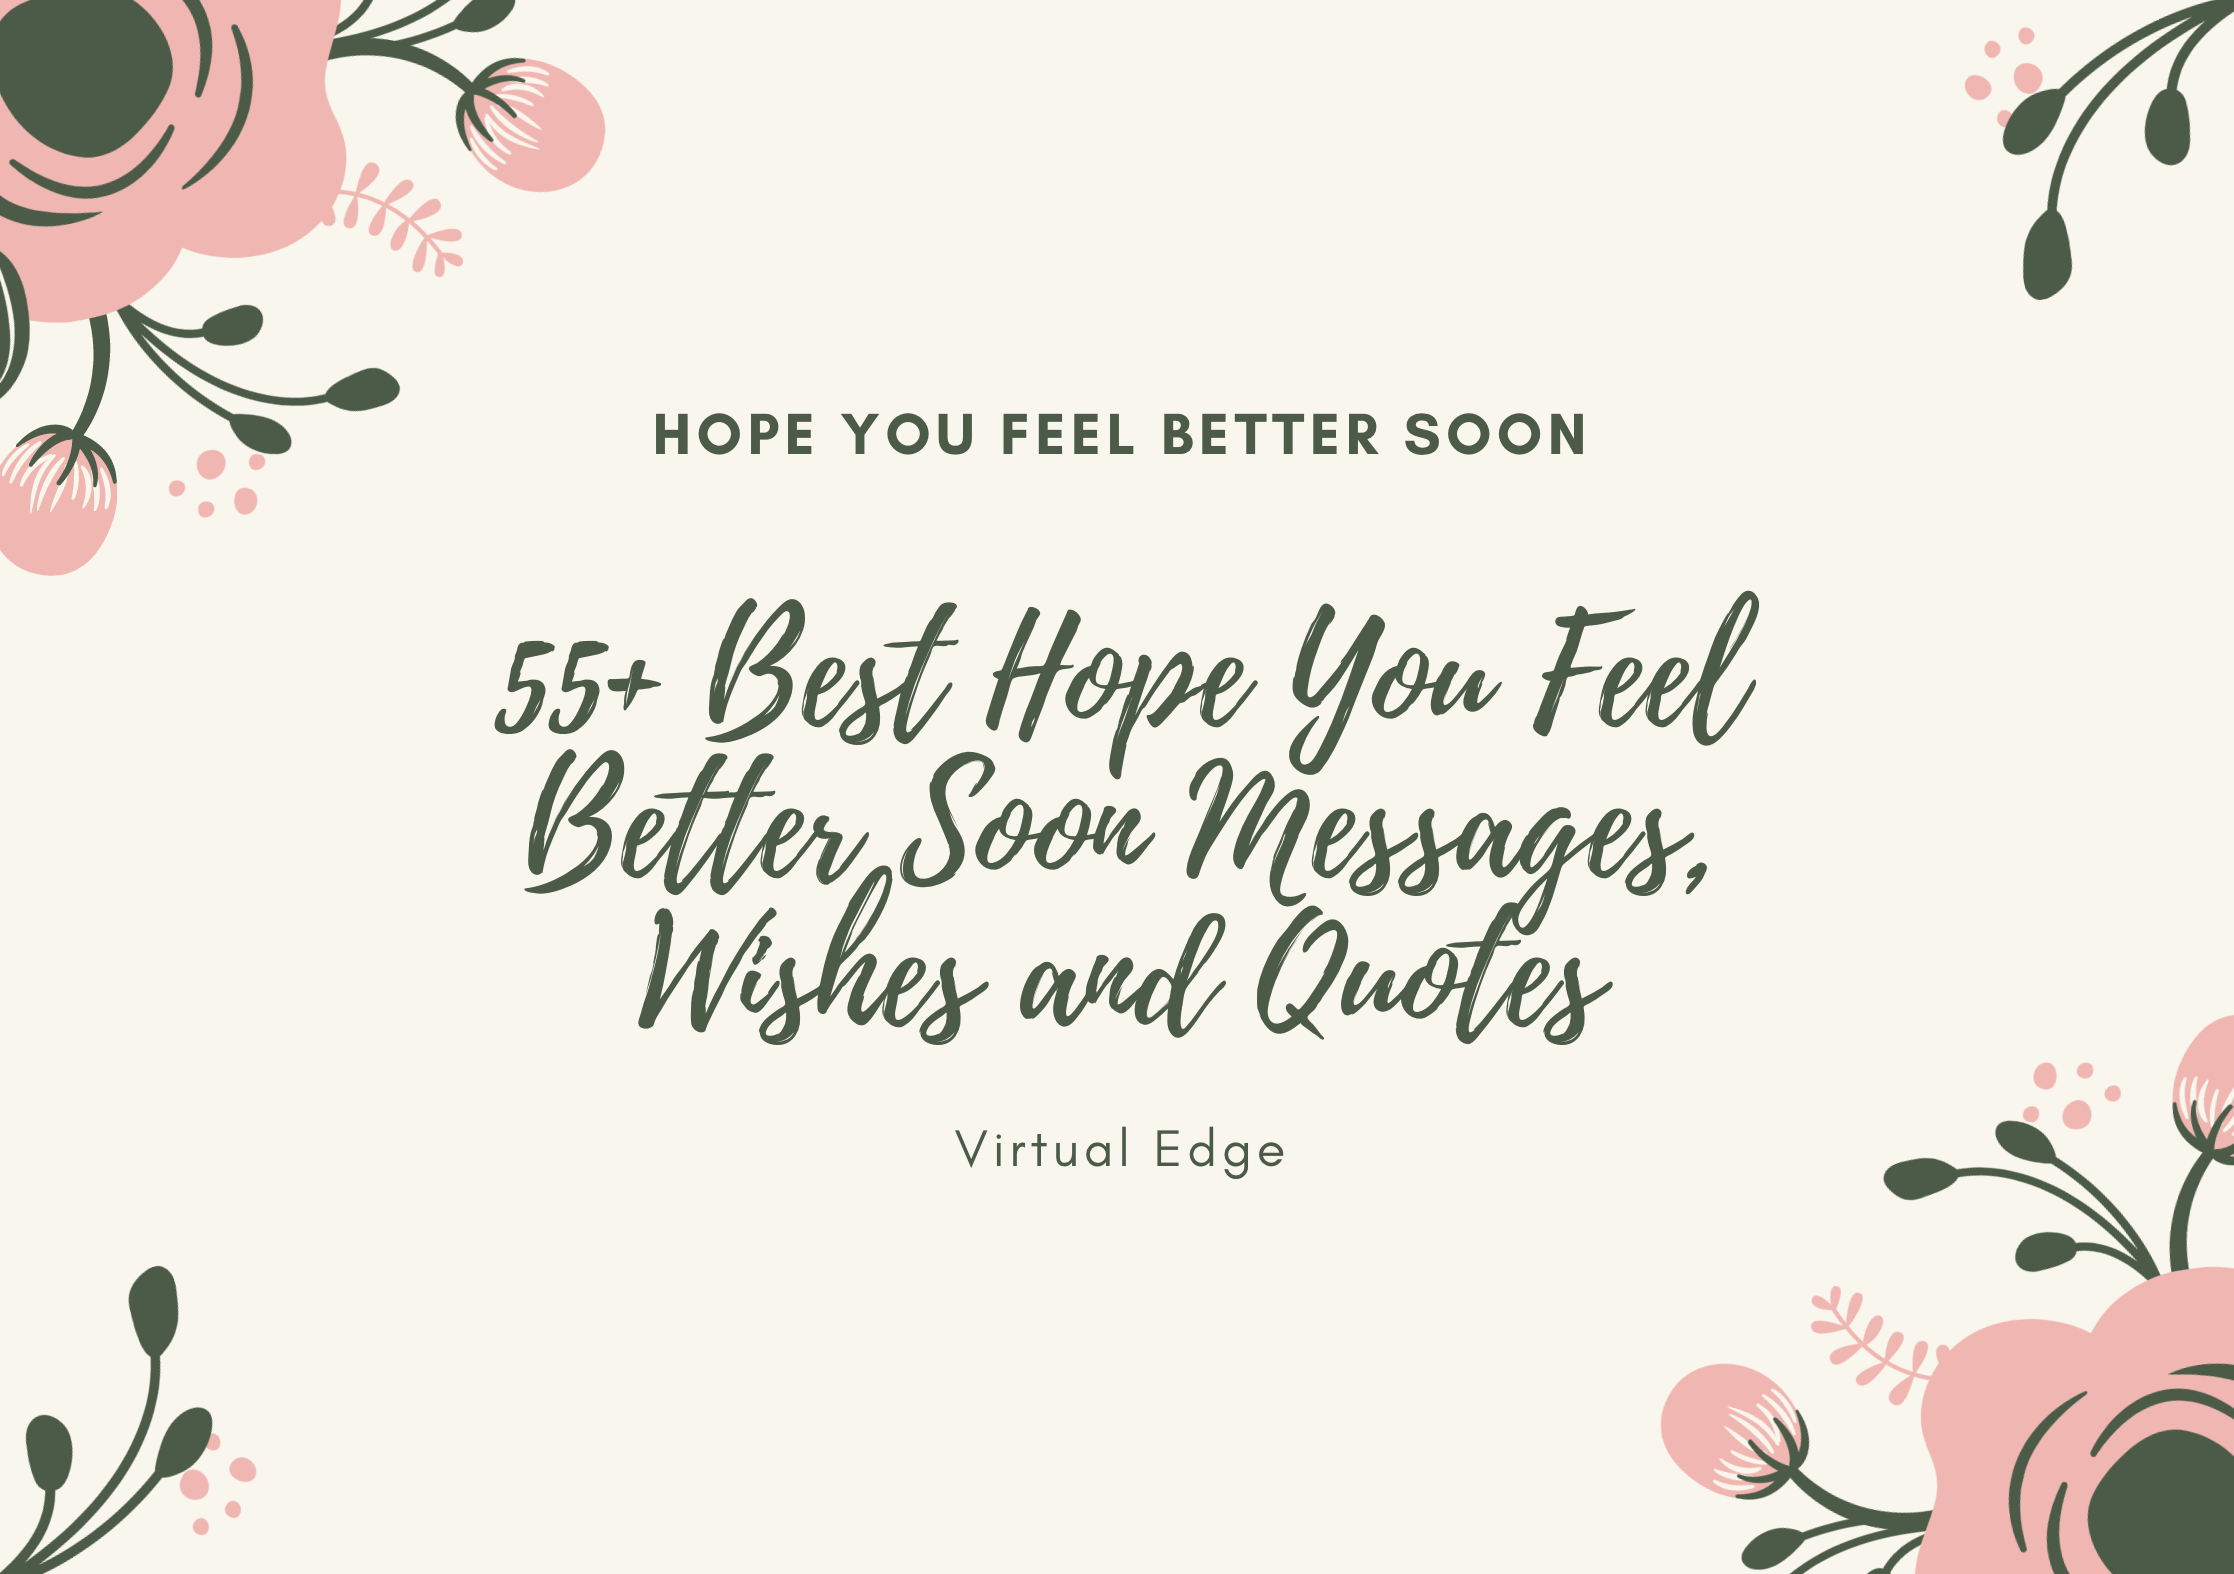 55+ Best Hope You Feel Better Soon Messages, Wishes and Quotes